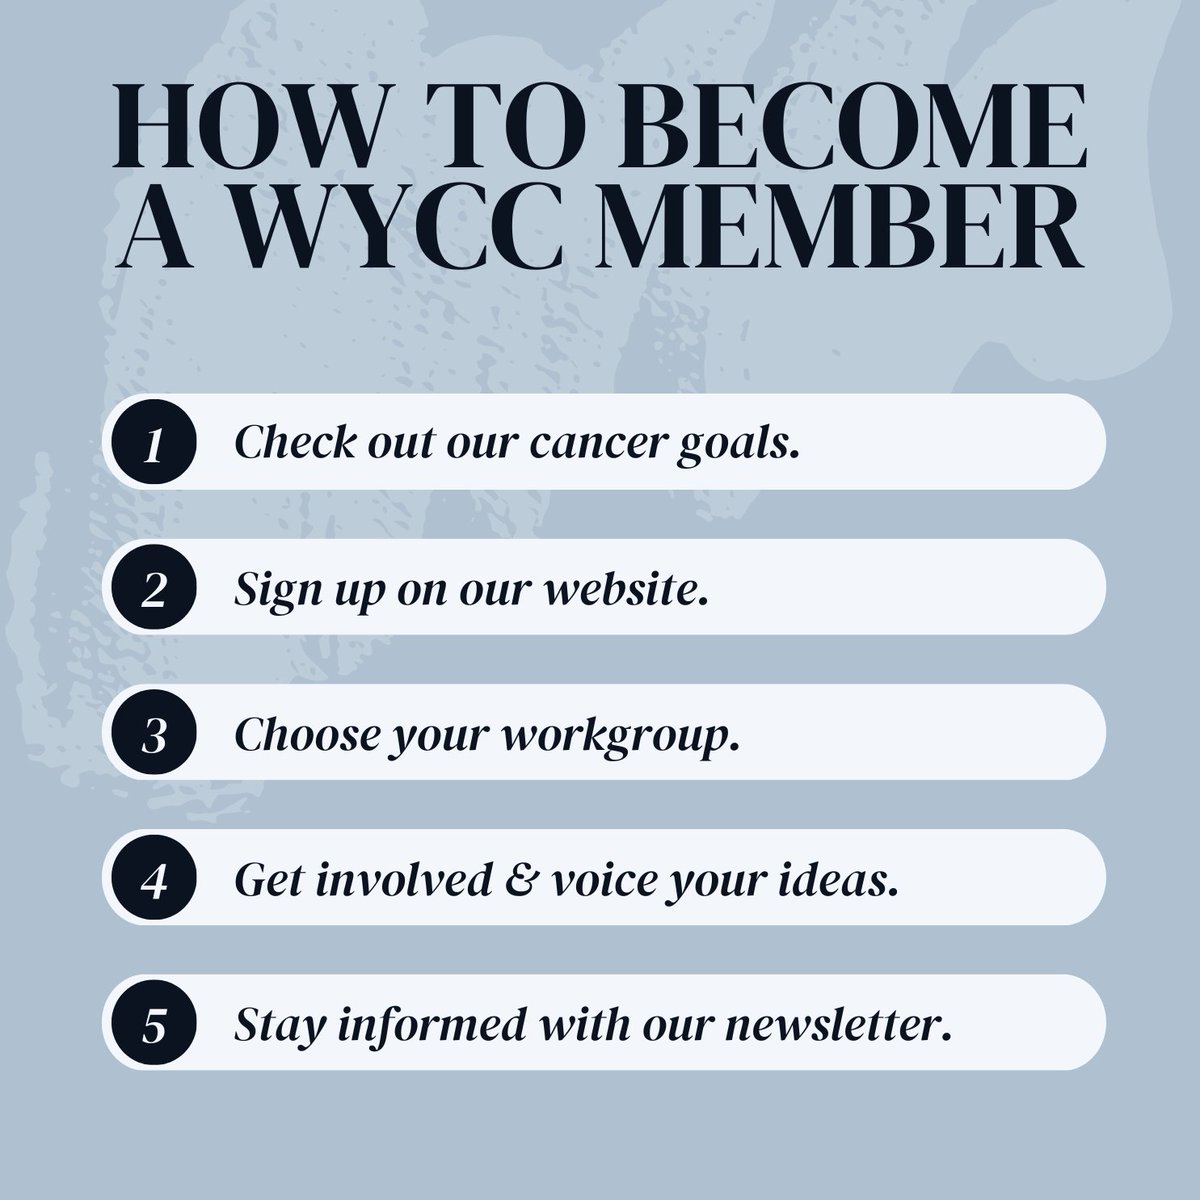 Thinking about becoming a member? Now is a great time, let us help you get started! #WyomingcancerCoalition #Reducingtheburden #gettingstarted #becomingamember